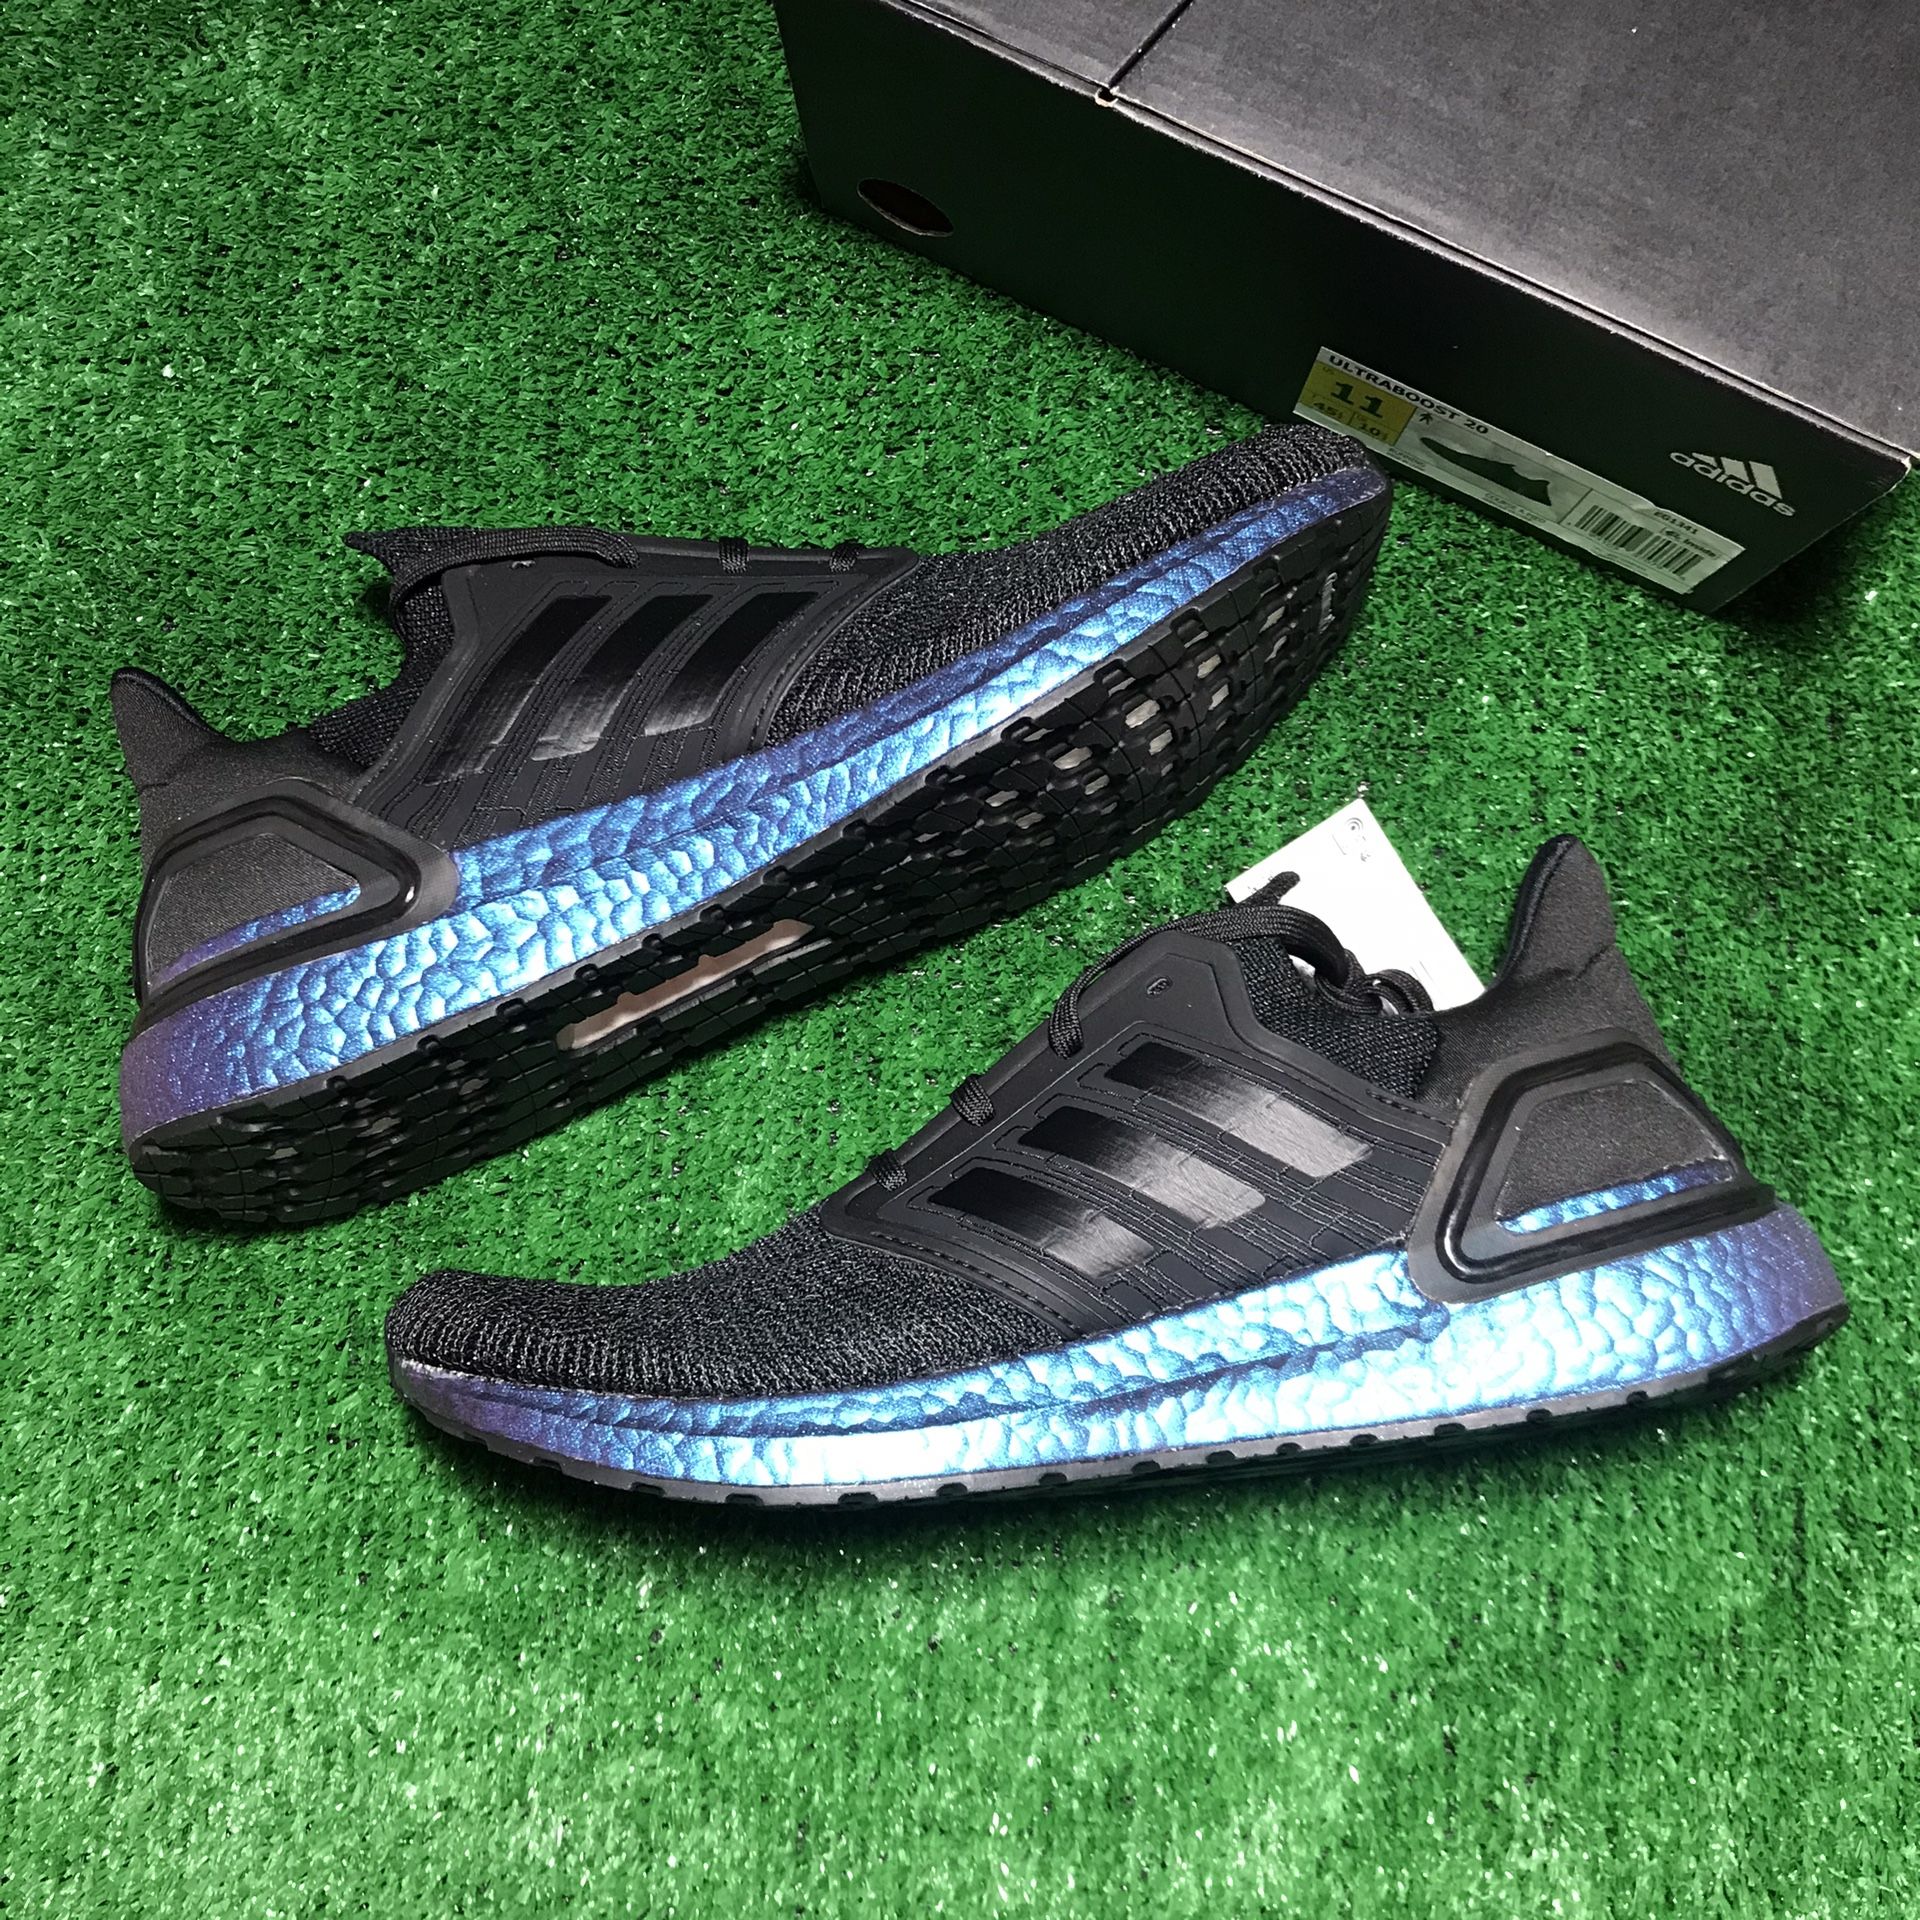 Adidas Ultra boost 20 “ISS US national lab core black”